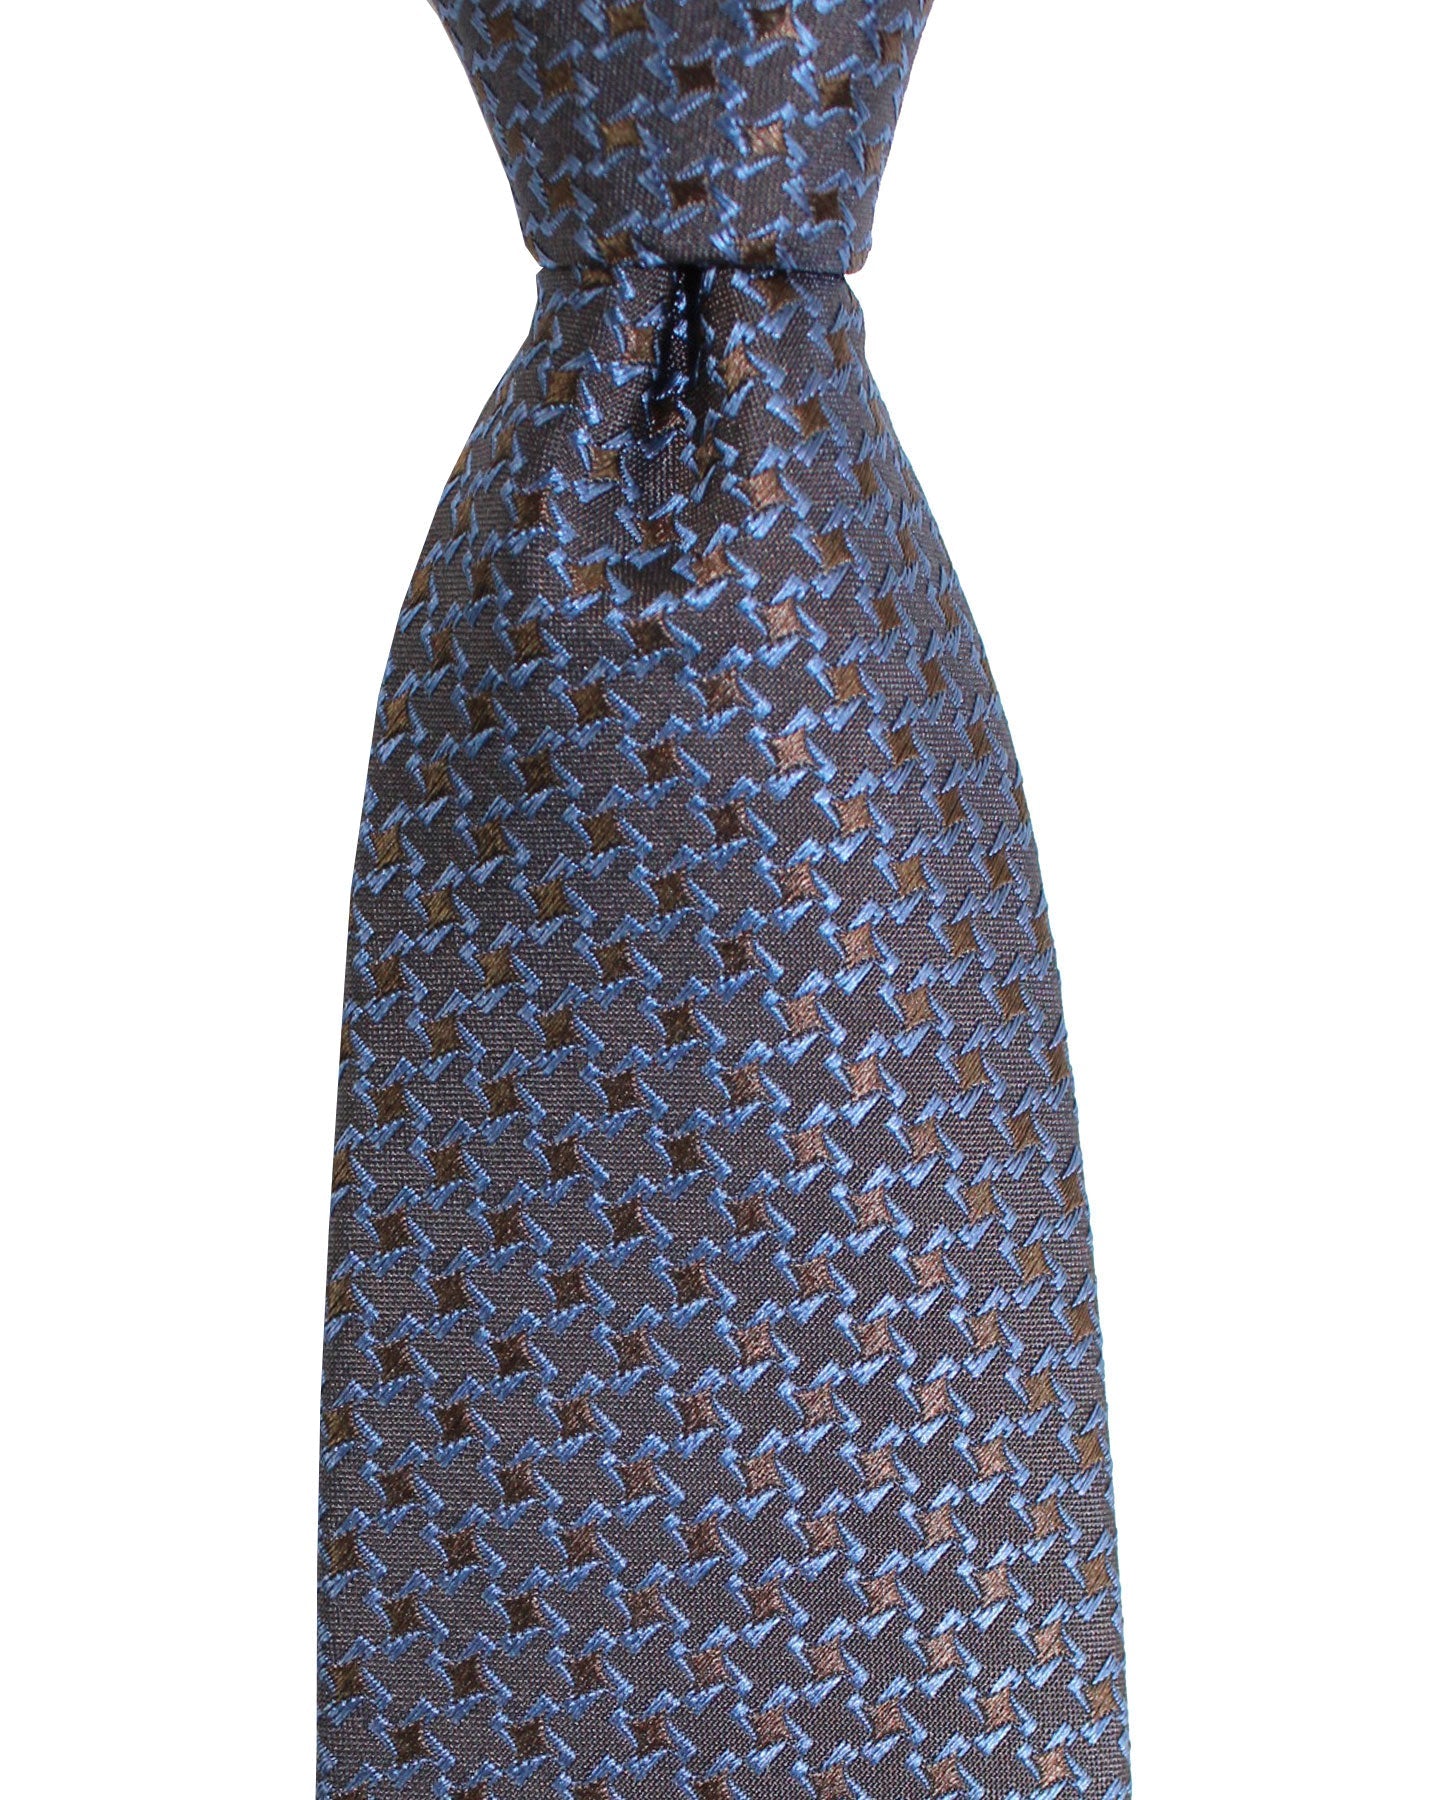 Knit and silk ties: designer ties for men - Canali US